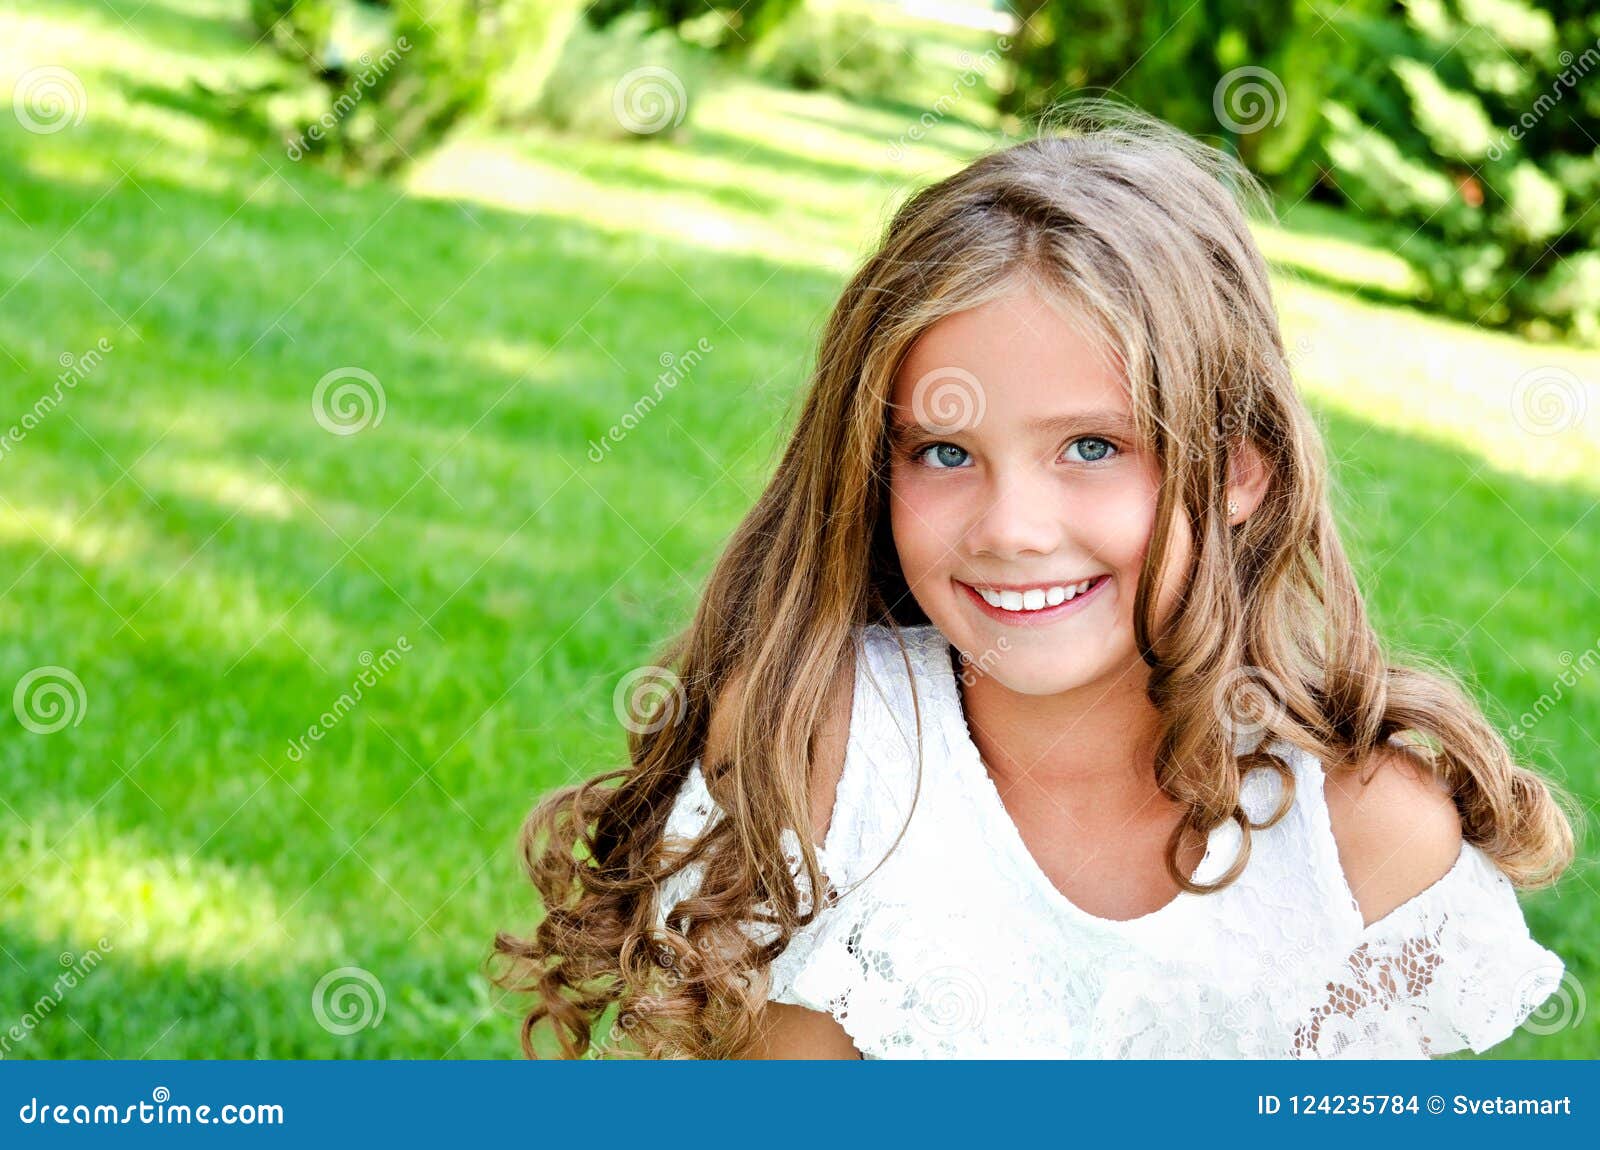 Portrait of Adorable Smiling Little Girl Child Outdoors Stock Photo ...